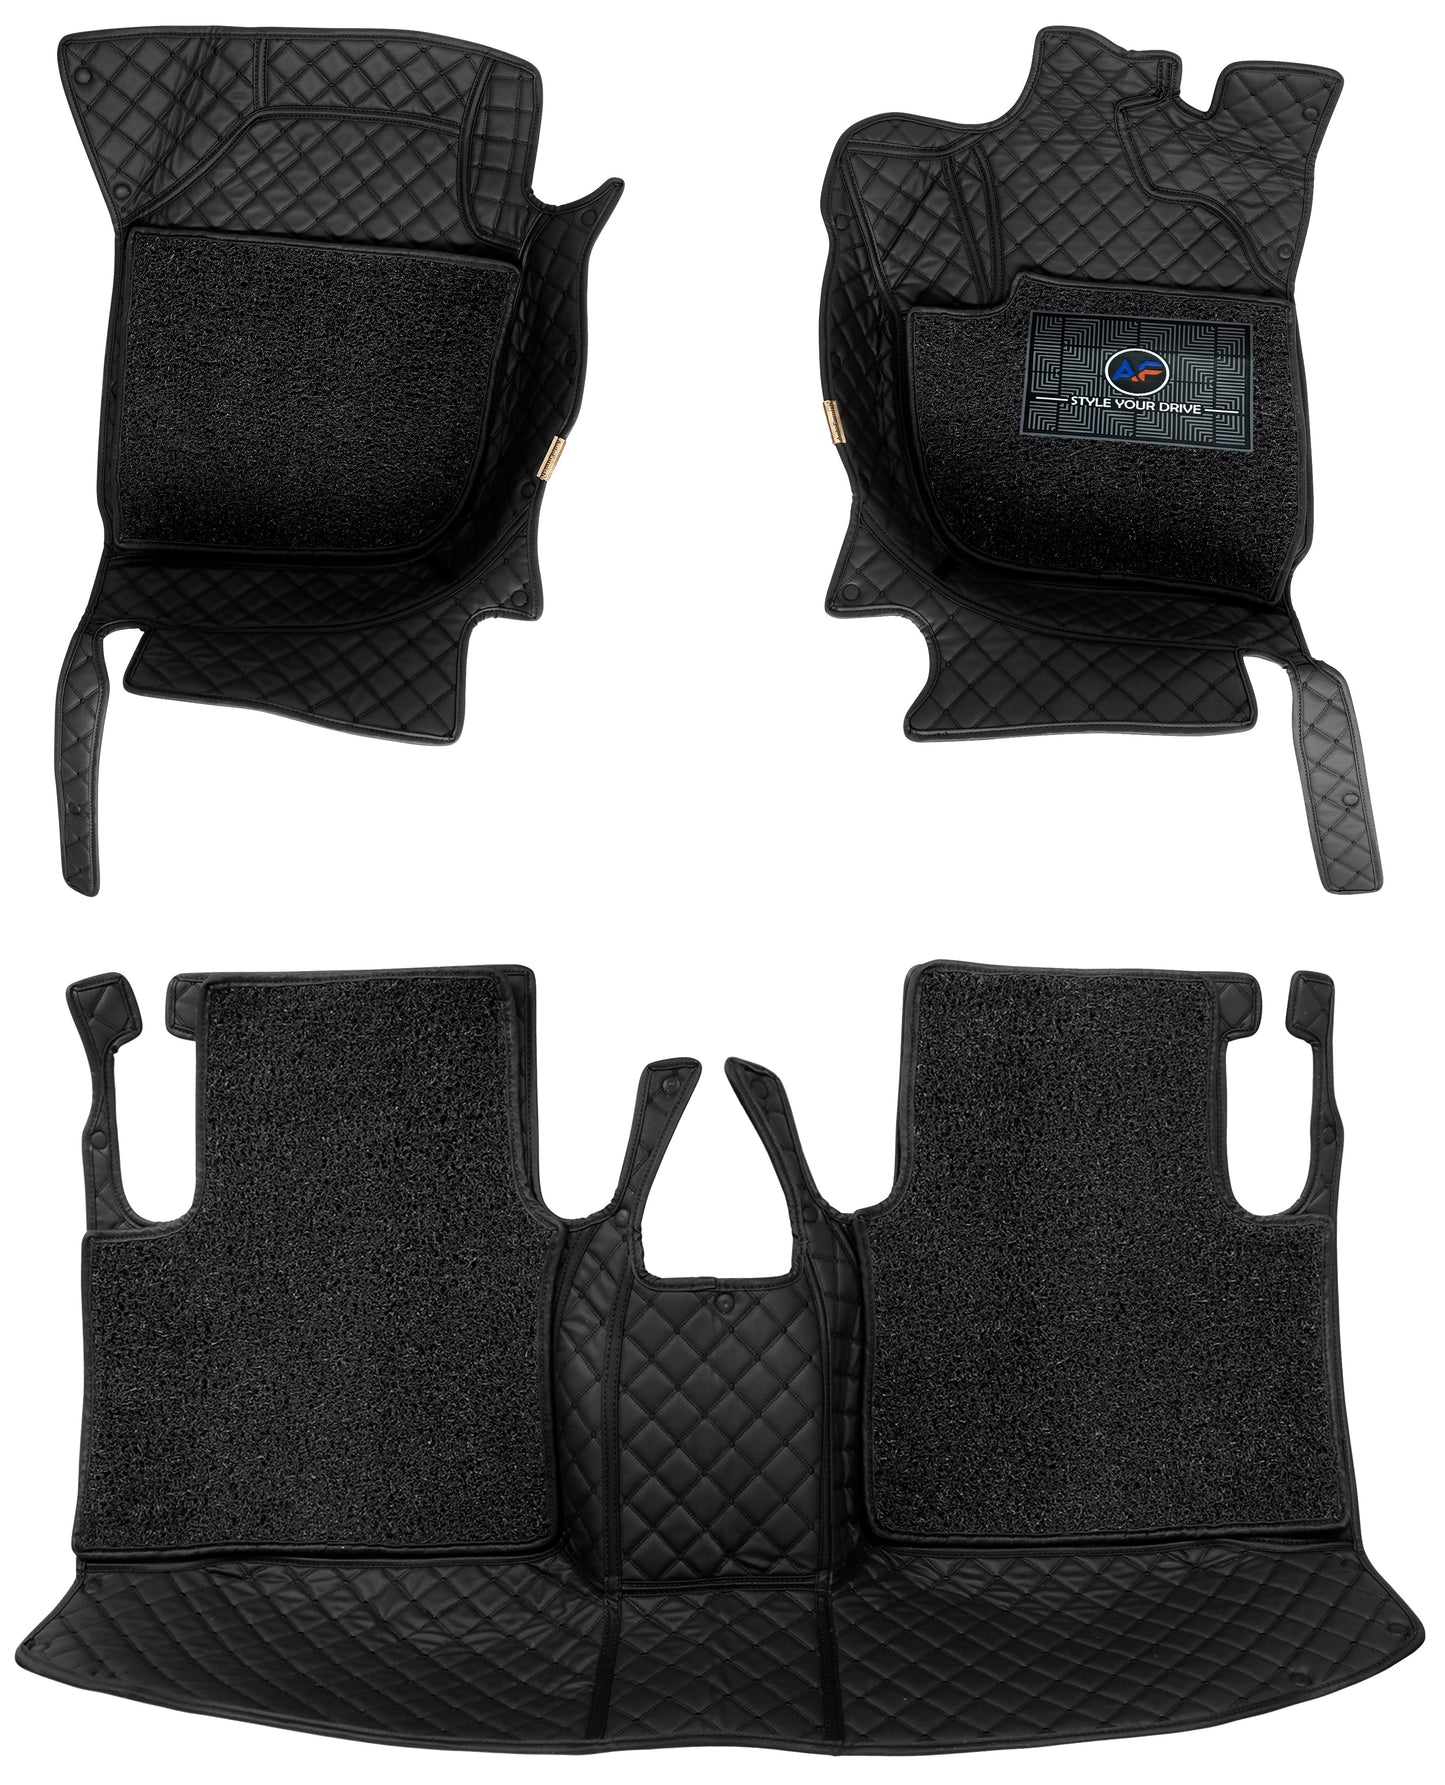 Mahindra Thar 2014-19-7D Luxury Car Mat, All Weather Proof, Anti-Skid, 100% Waterproof & Odorless with Unique Diamond Fish Design (24mm Luxury PU Leather, 2 Rows)